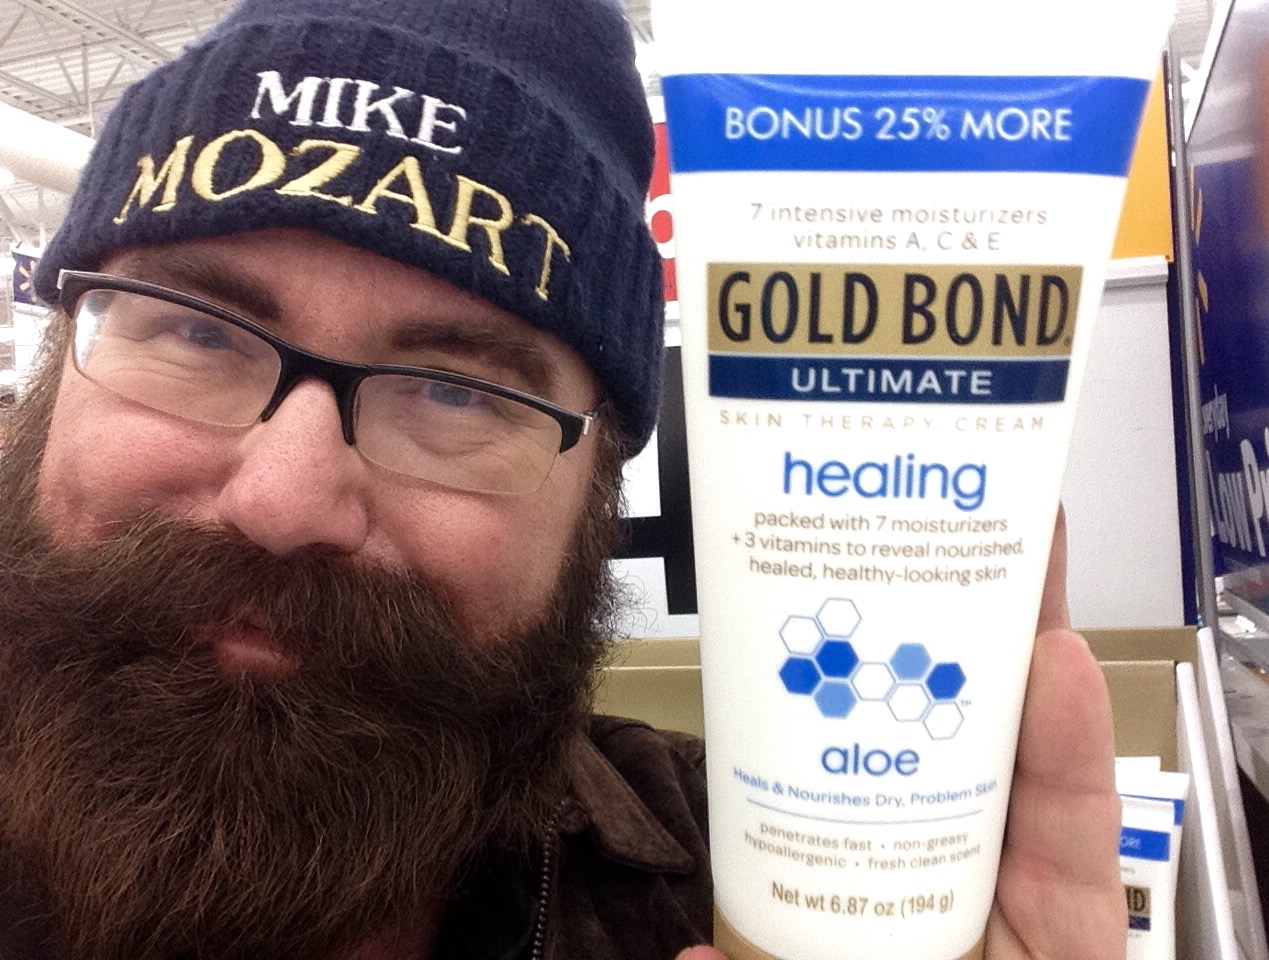 a man with glasses and a hat holds up a tube of gold bond